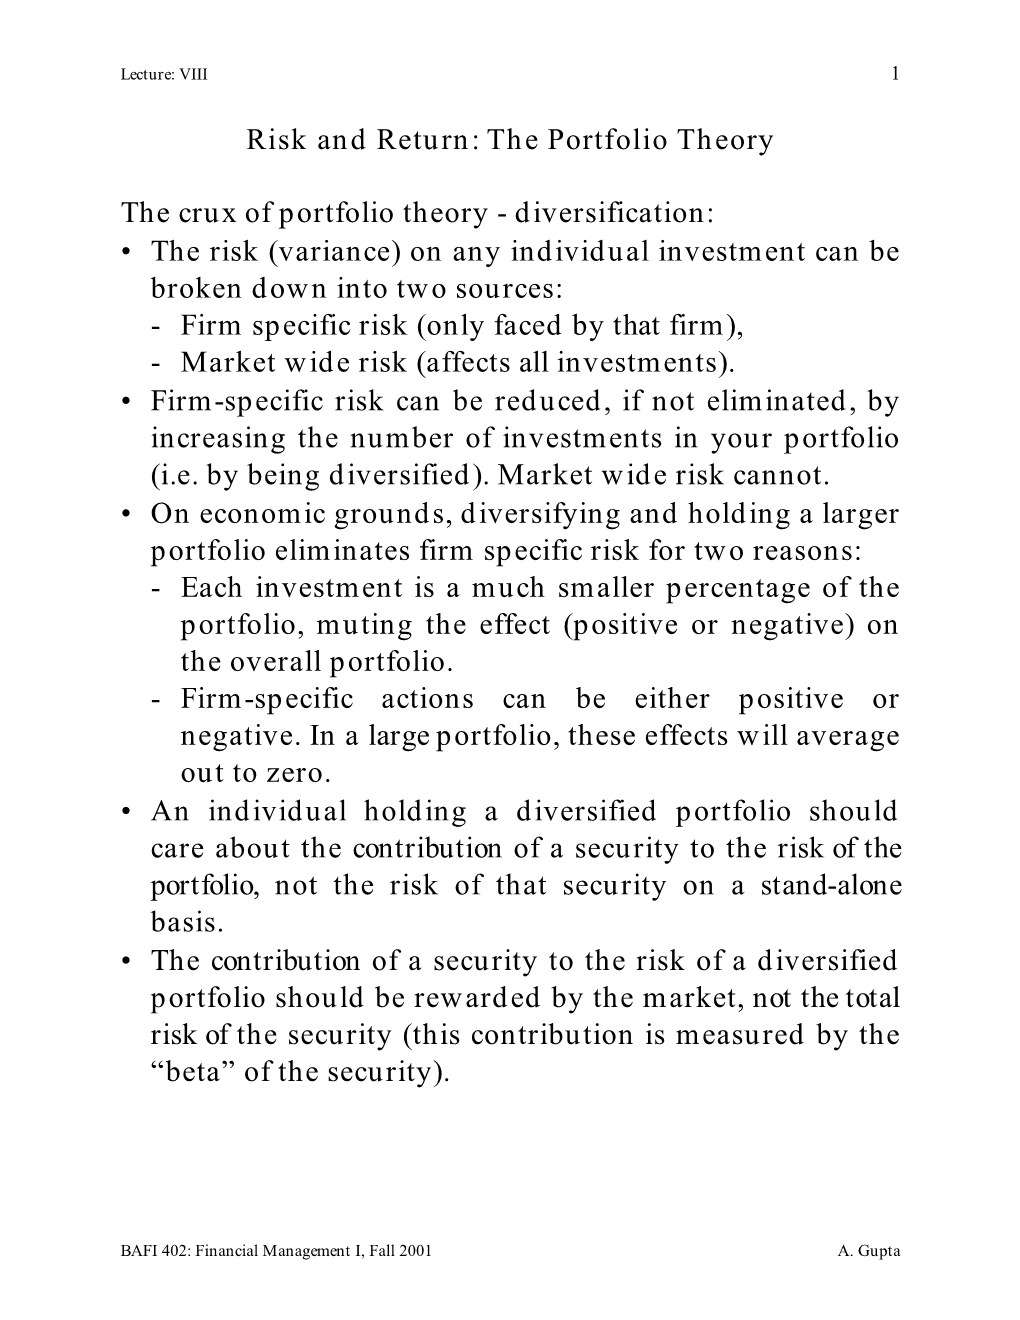 Diversification: • the Risk (Variance)